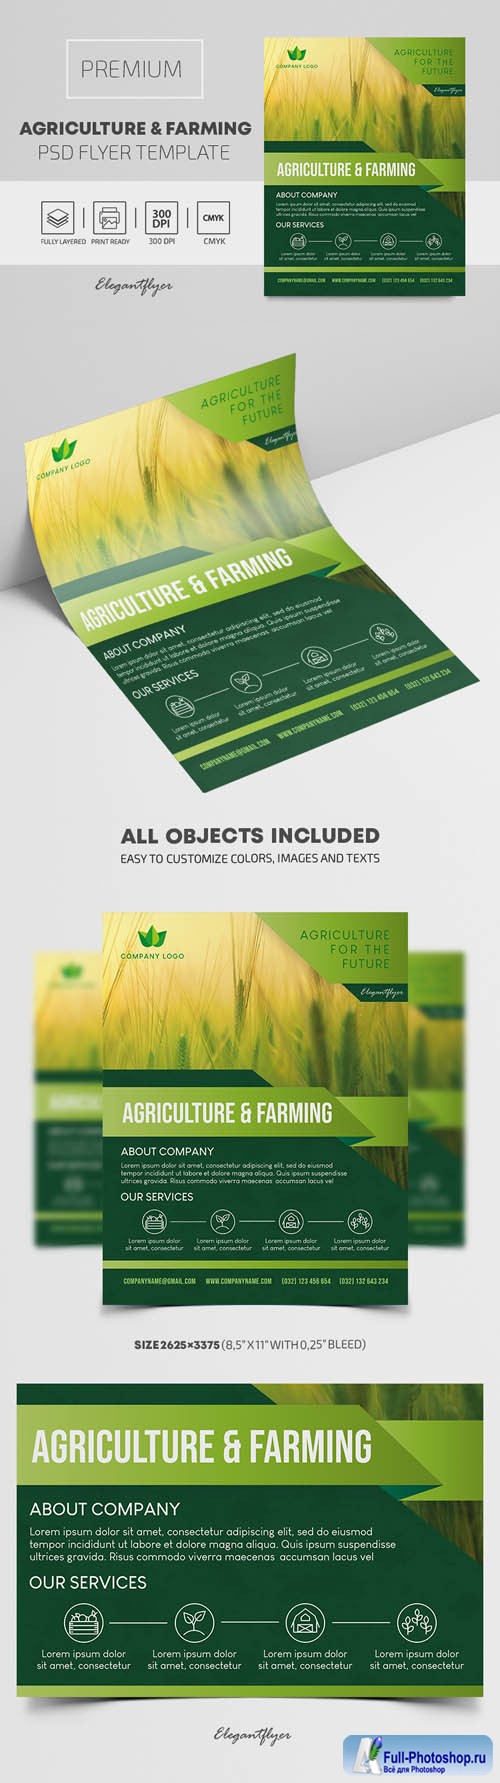 Agriculture and Farming Premium PSD Flyer Template